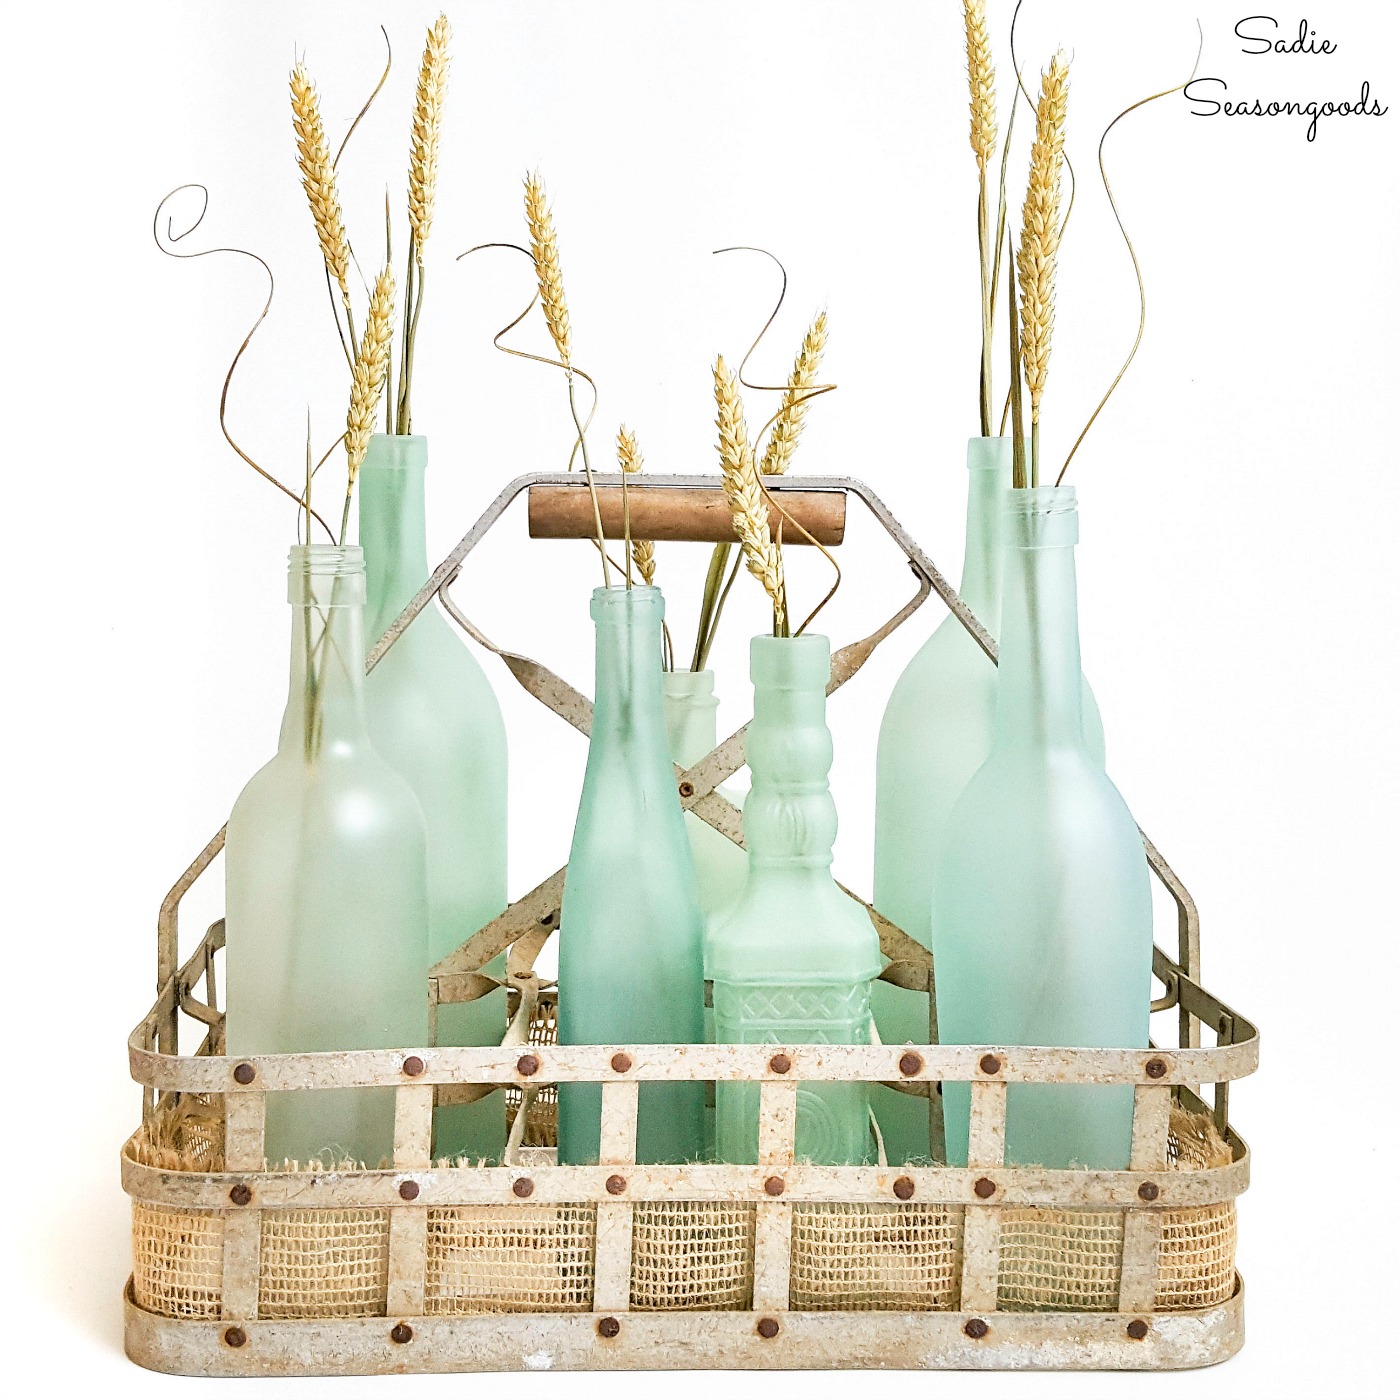 Recycled Glass Bottles, Vases & Jars with Sea Glass Spray Paint